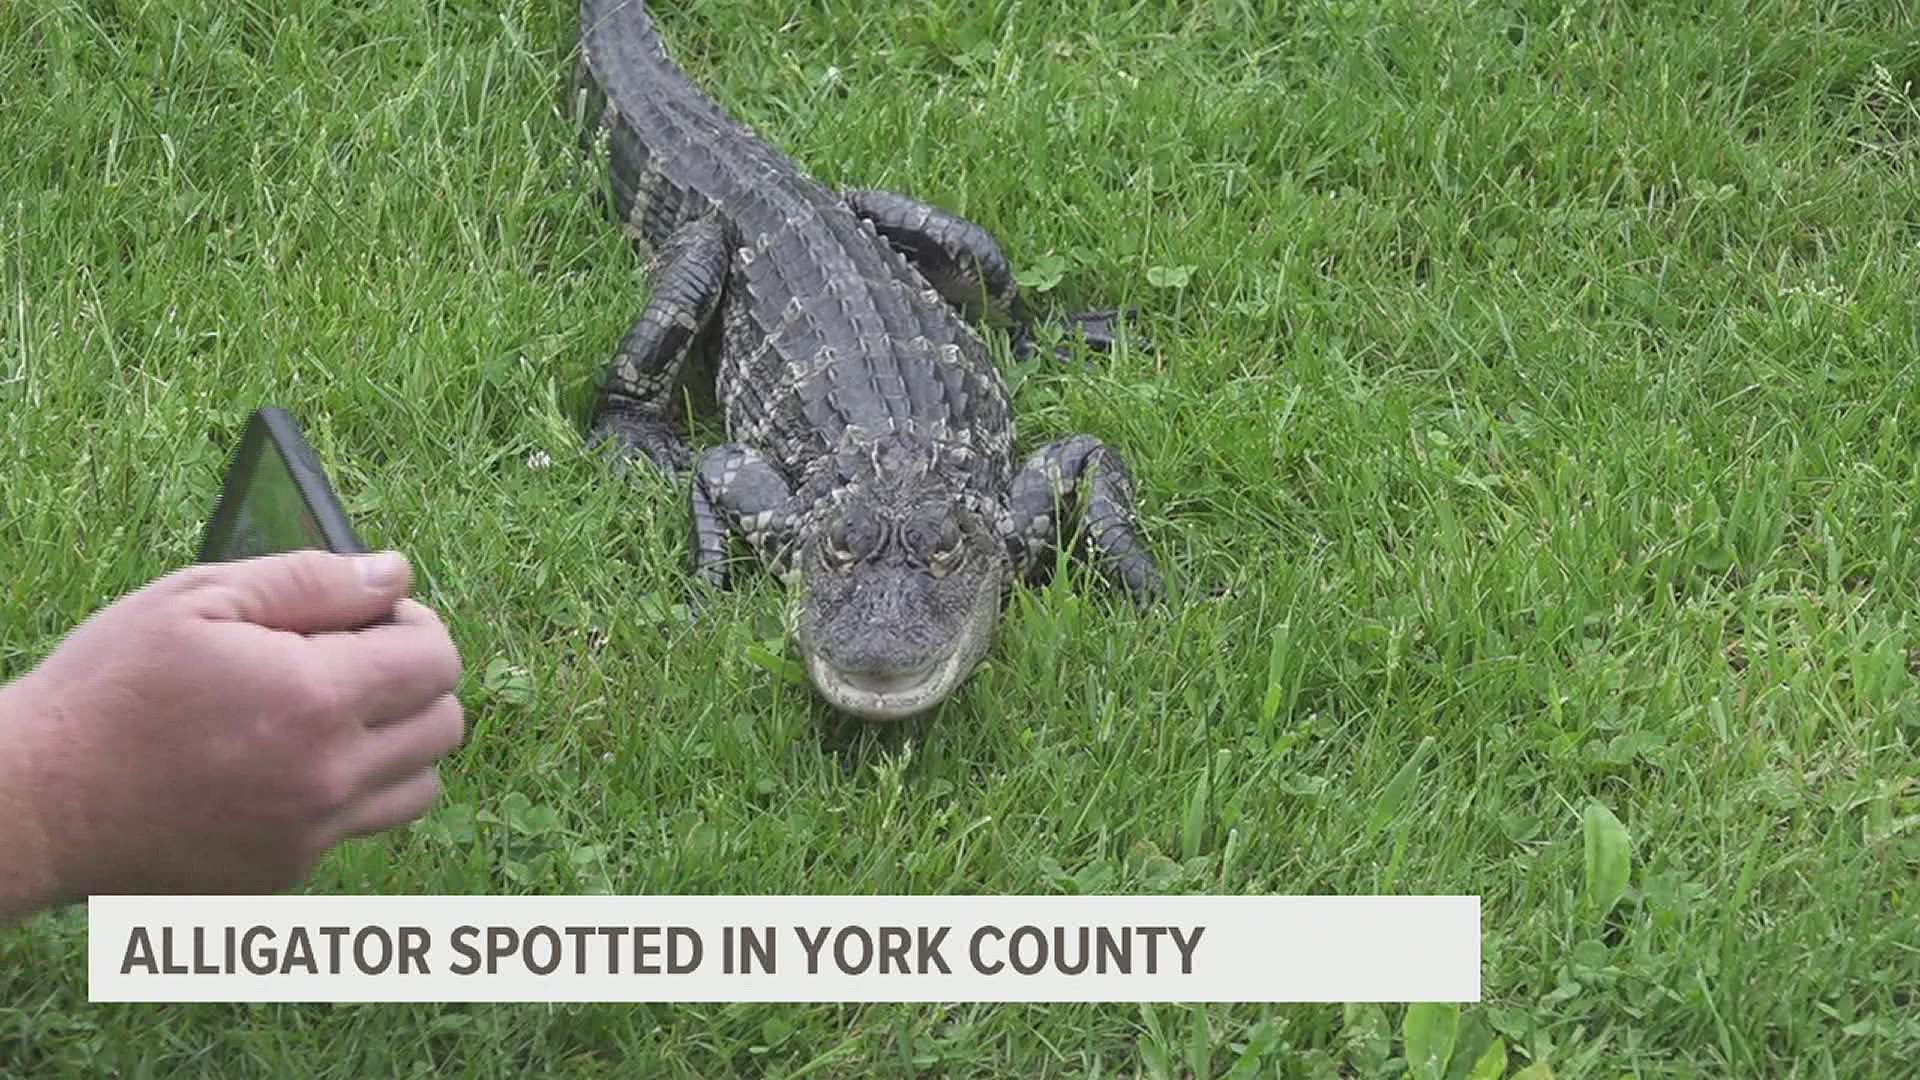 Wrightsville borough officials say a few people spotted an alligator swimming in the Susquehanna River Friday morning